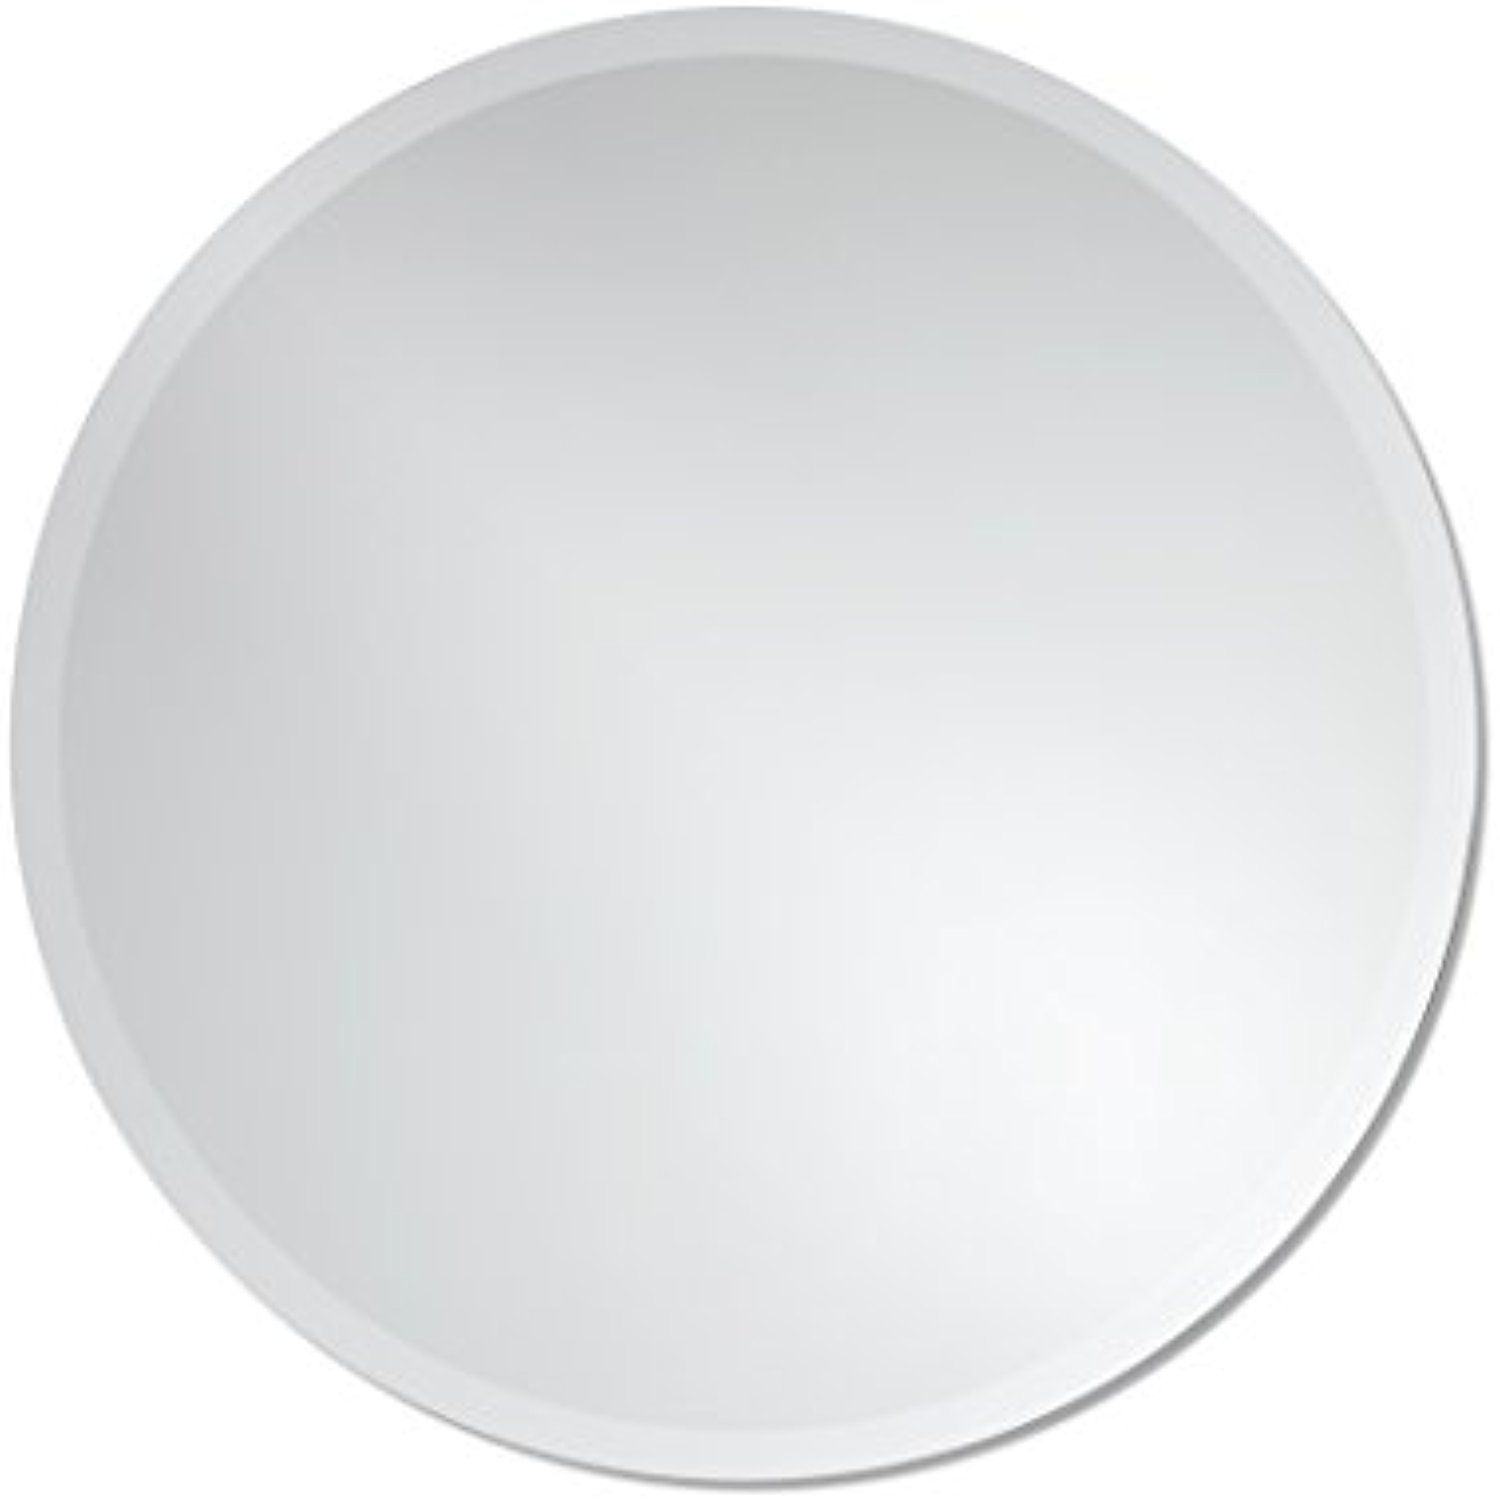 Round Frameless Wall Mirror | Bathroom, Vanity, Bedroom Mirror | 24 With Regard To Round Frameless Beveled Mirrors (View 15 of 15)